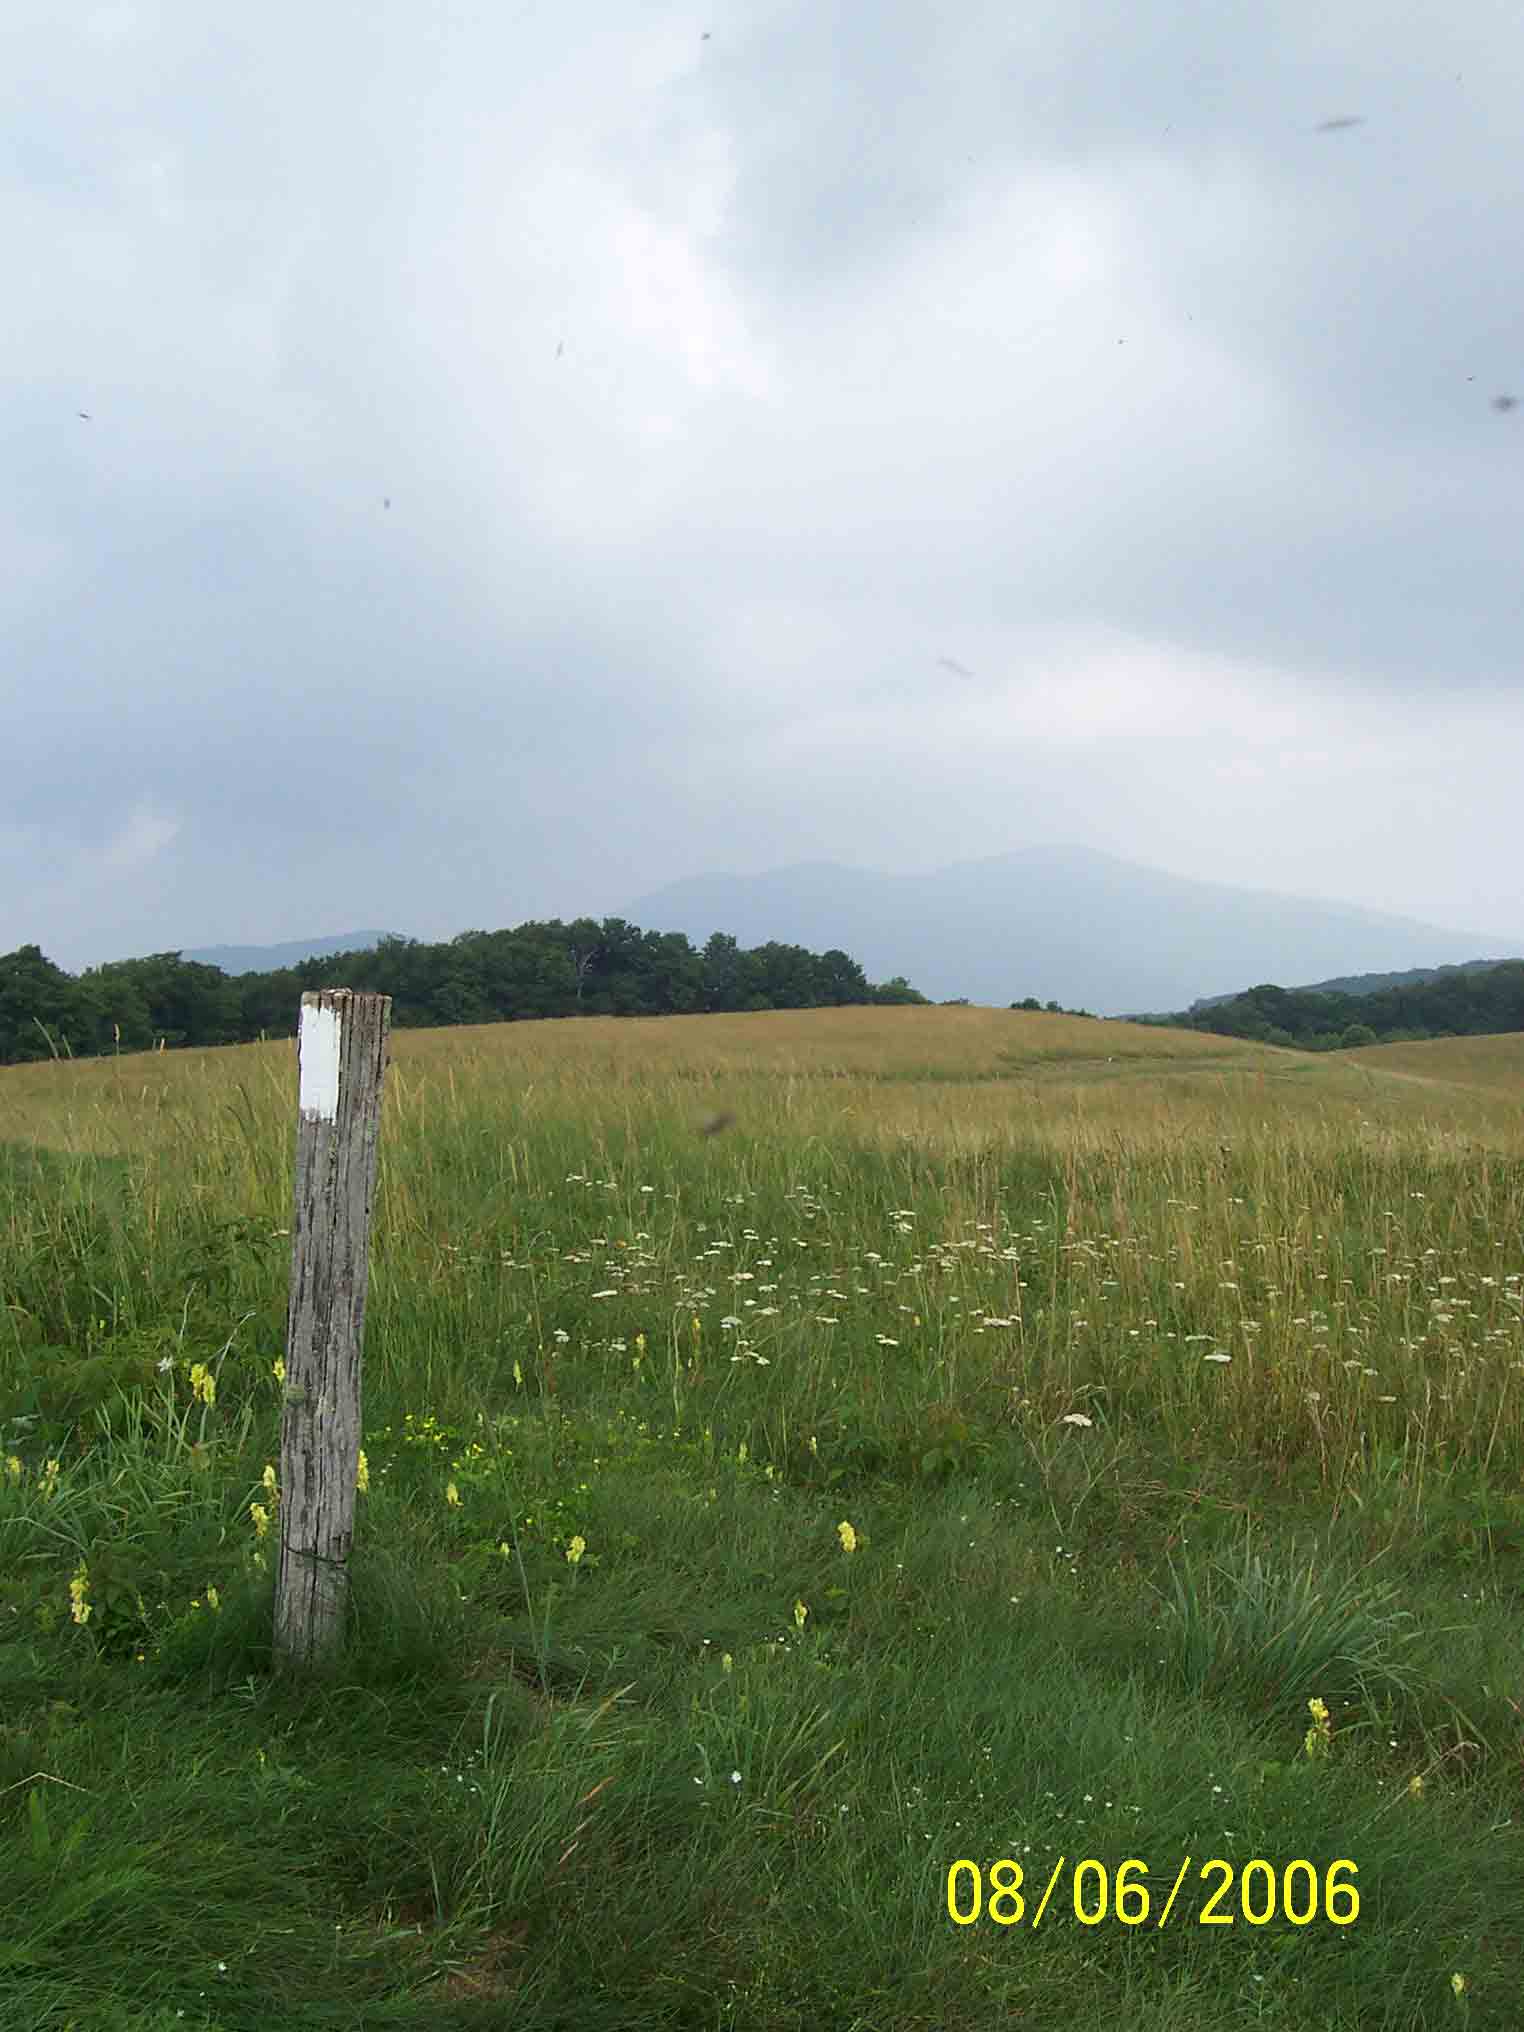 Taken at Max Patch, NC of whiteblaze AT marker during 08/2006. Taken at approx. mm 19.8.  Courtesy ramjet58@msn.com